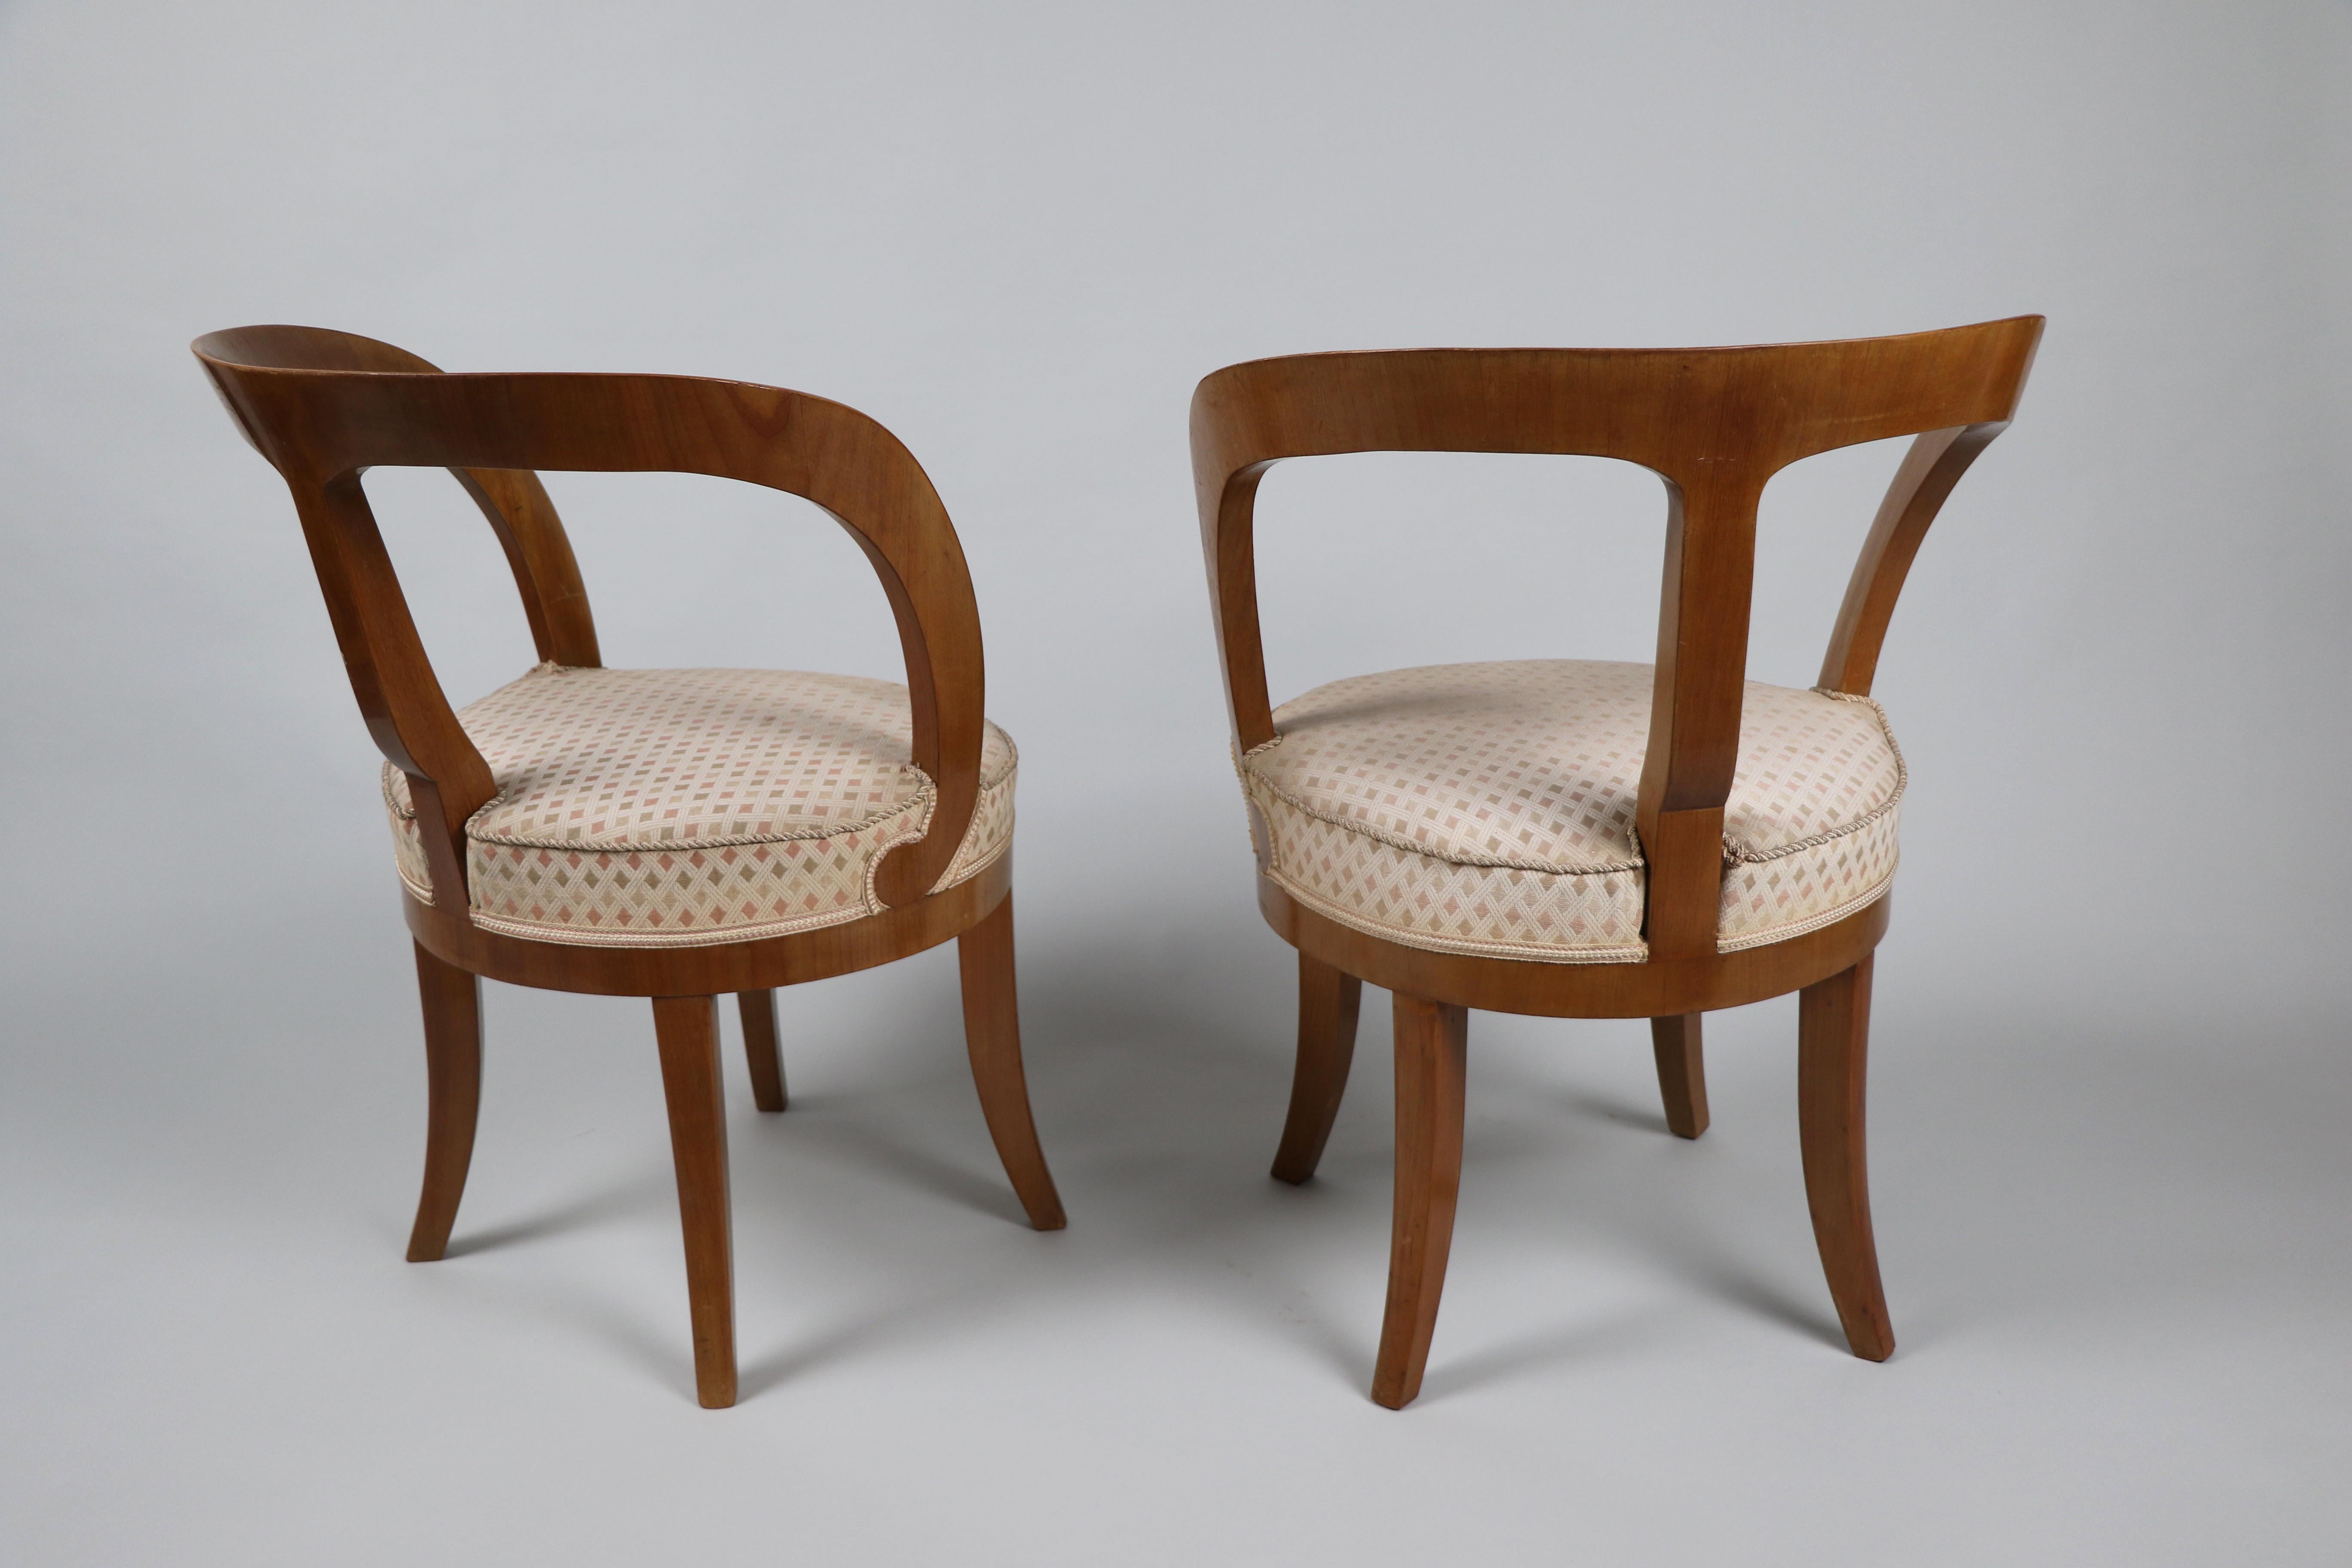 Polished 19th Century Fine Pair of Biedermeier Cherry Chairs. Vienna, c. 1825. For Sale